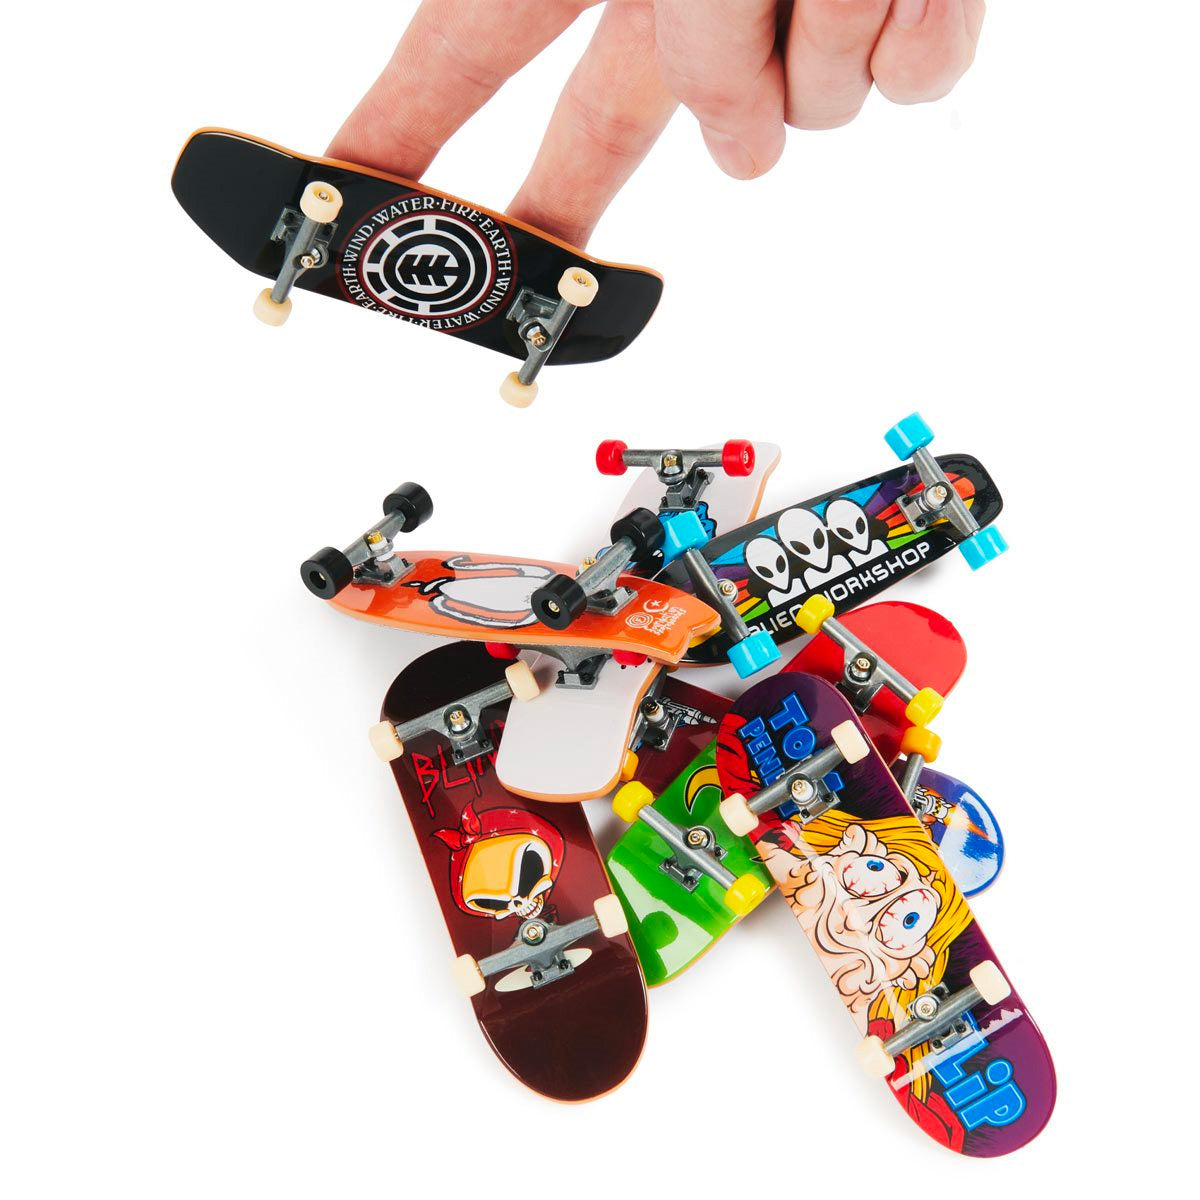 Tech Deck 25th Anniversary Fingerboards 8 Pack